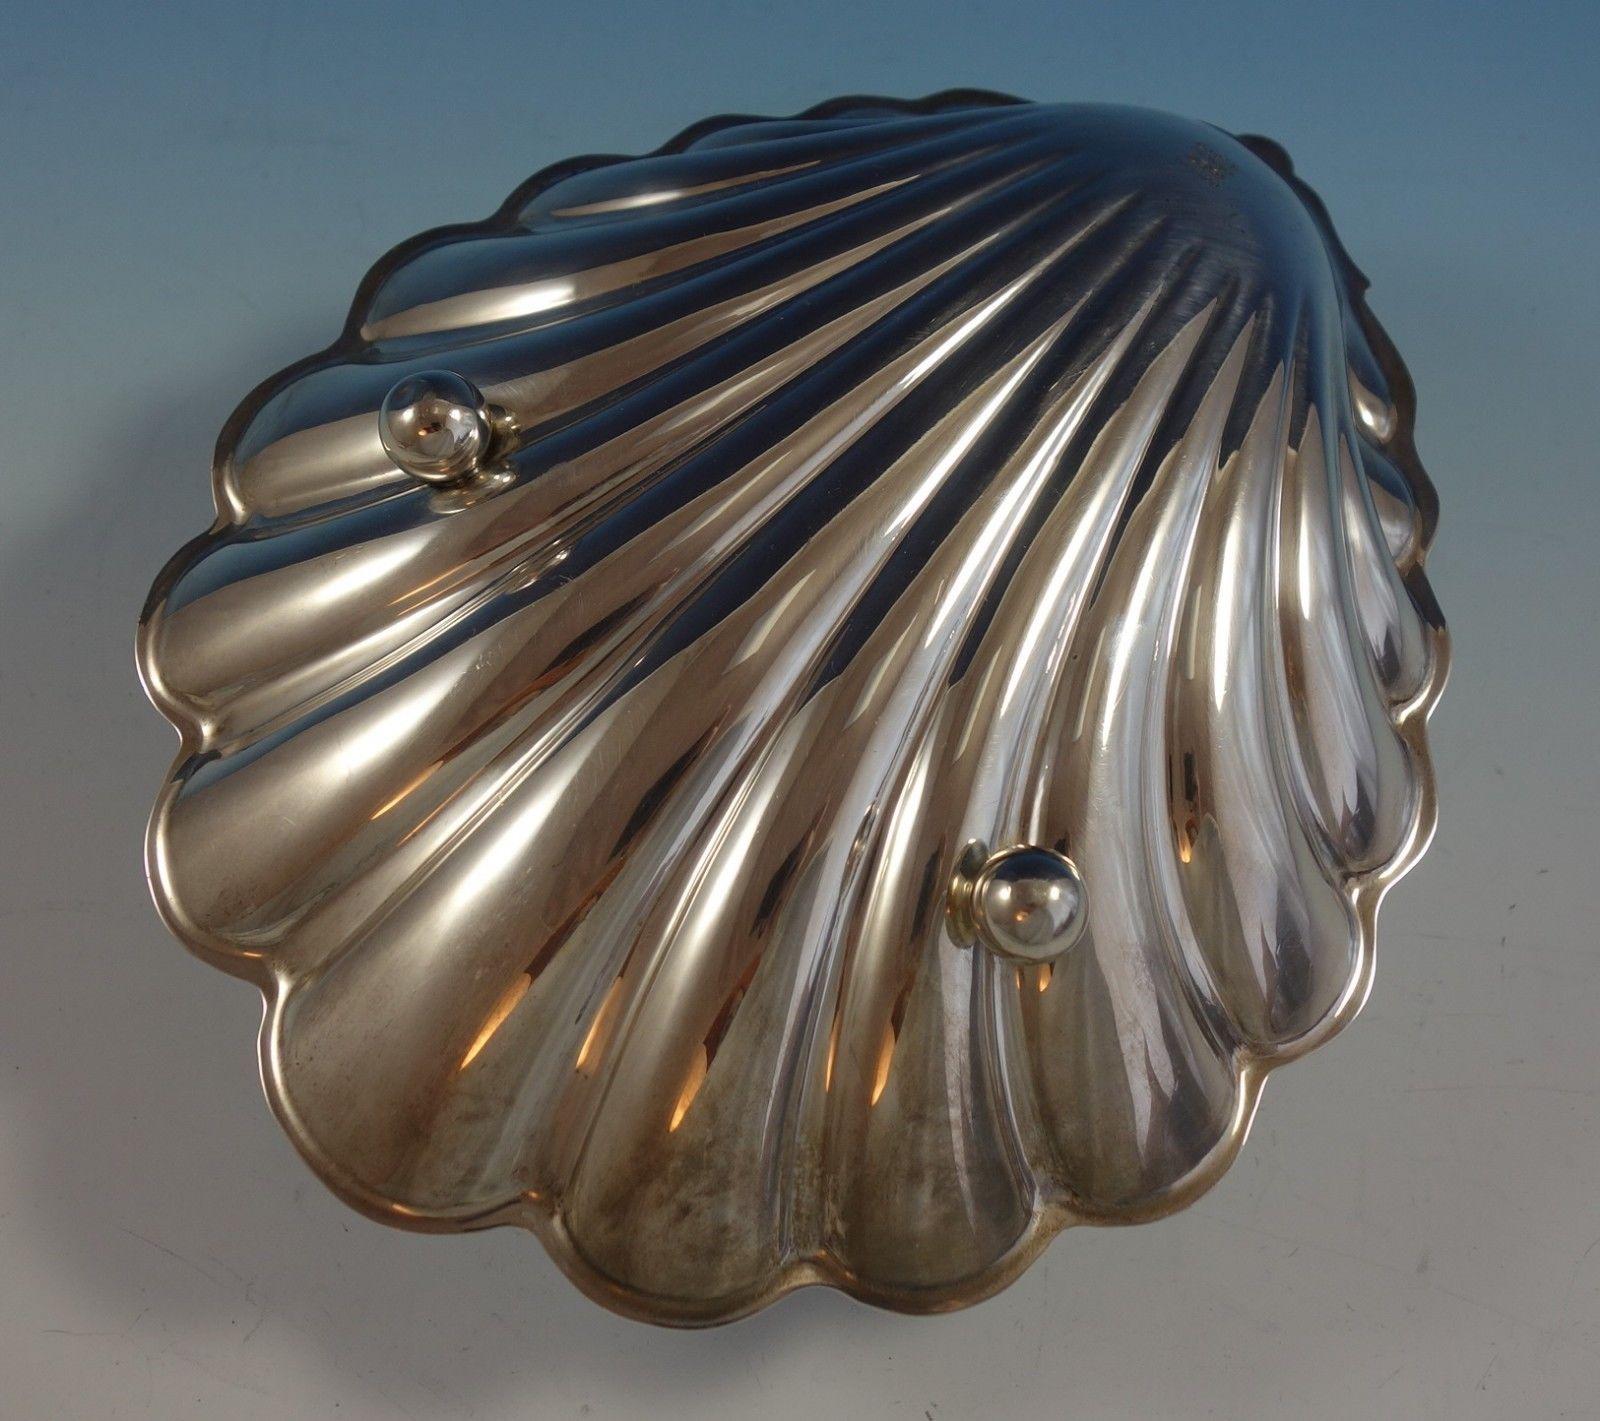 American Gorham Sterling Silver Dish Shell Shaped with Ball Feet #42606